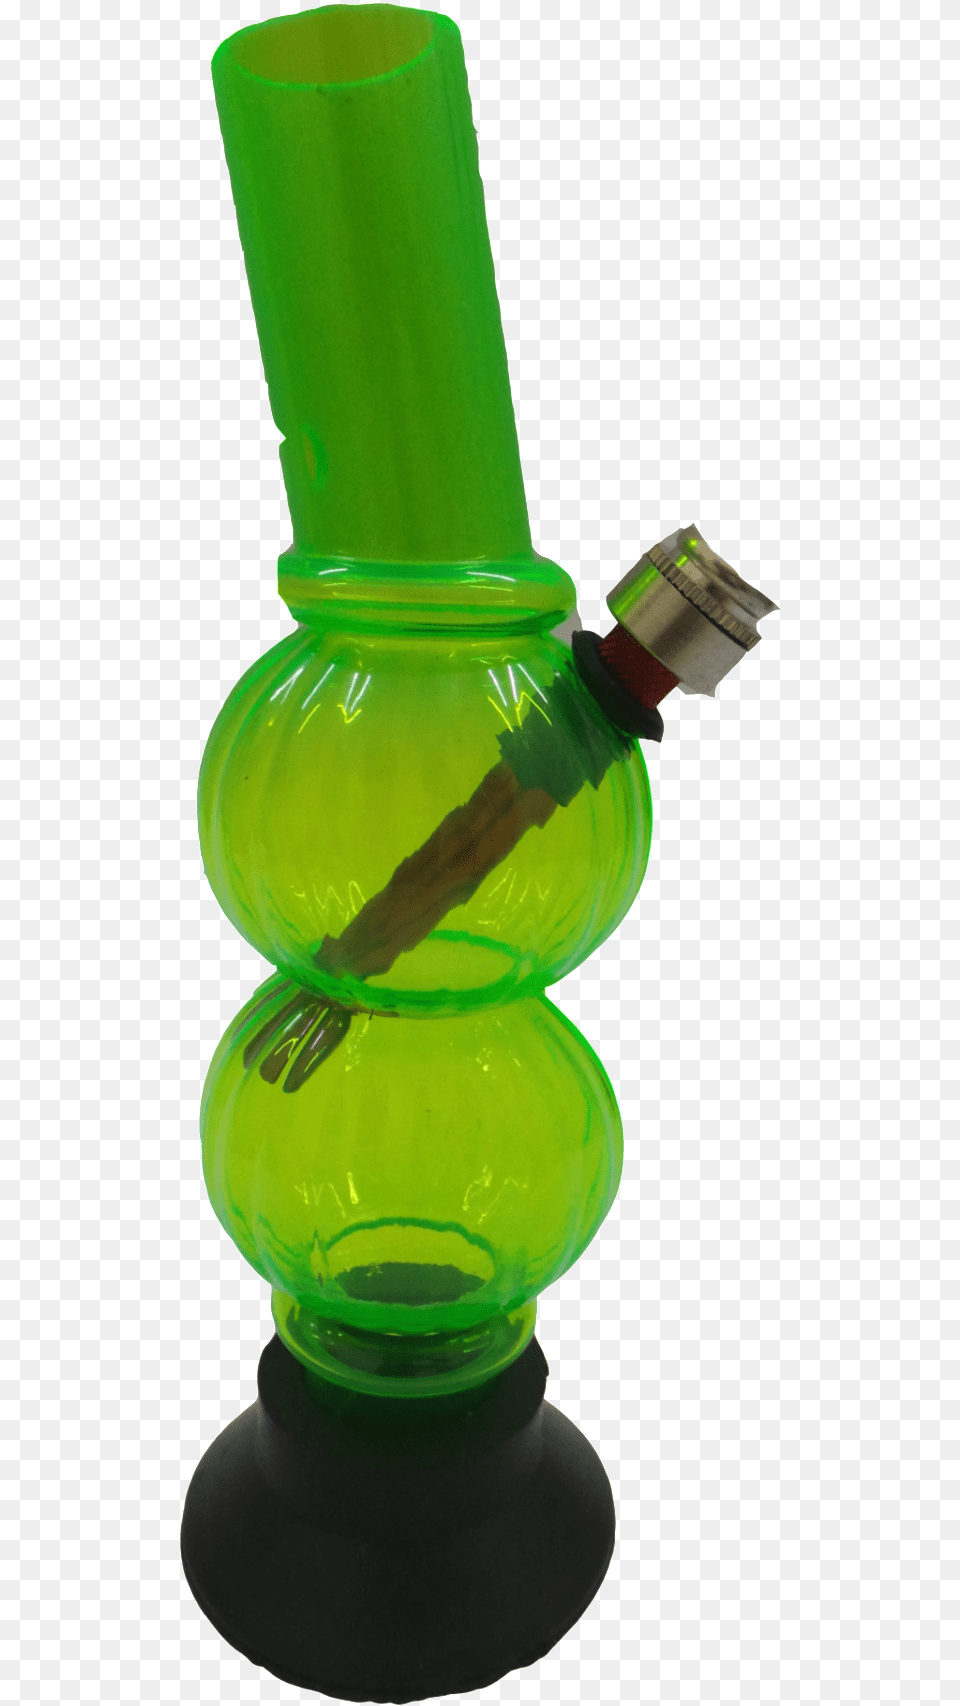 Fat 2 Furious Acrylic Bong Plastic, Green, Jar, Bottle, Cutlery Free Png Download